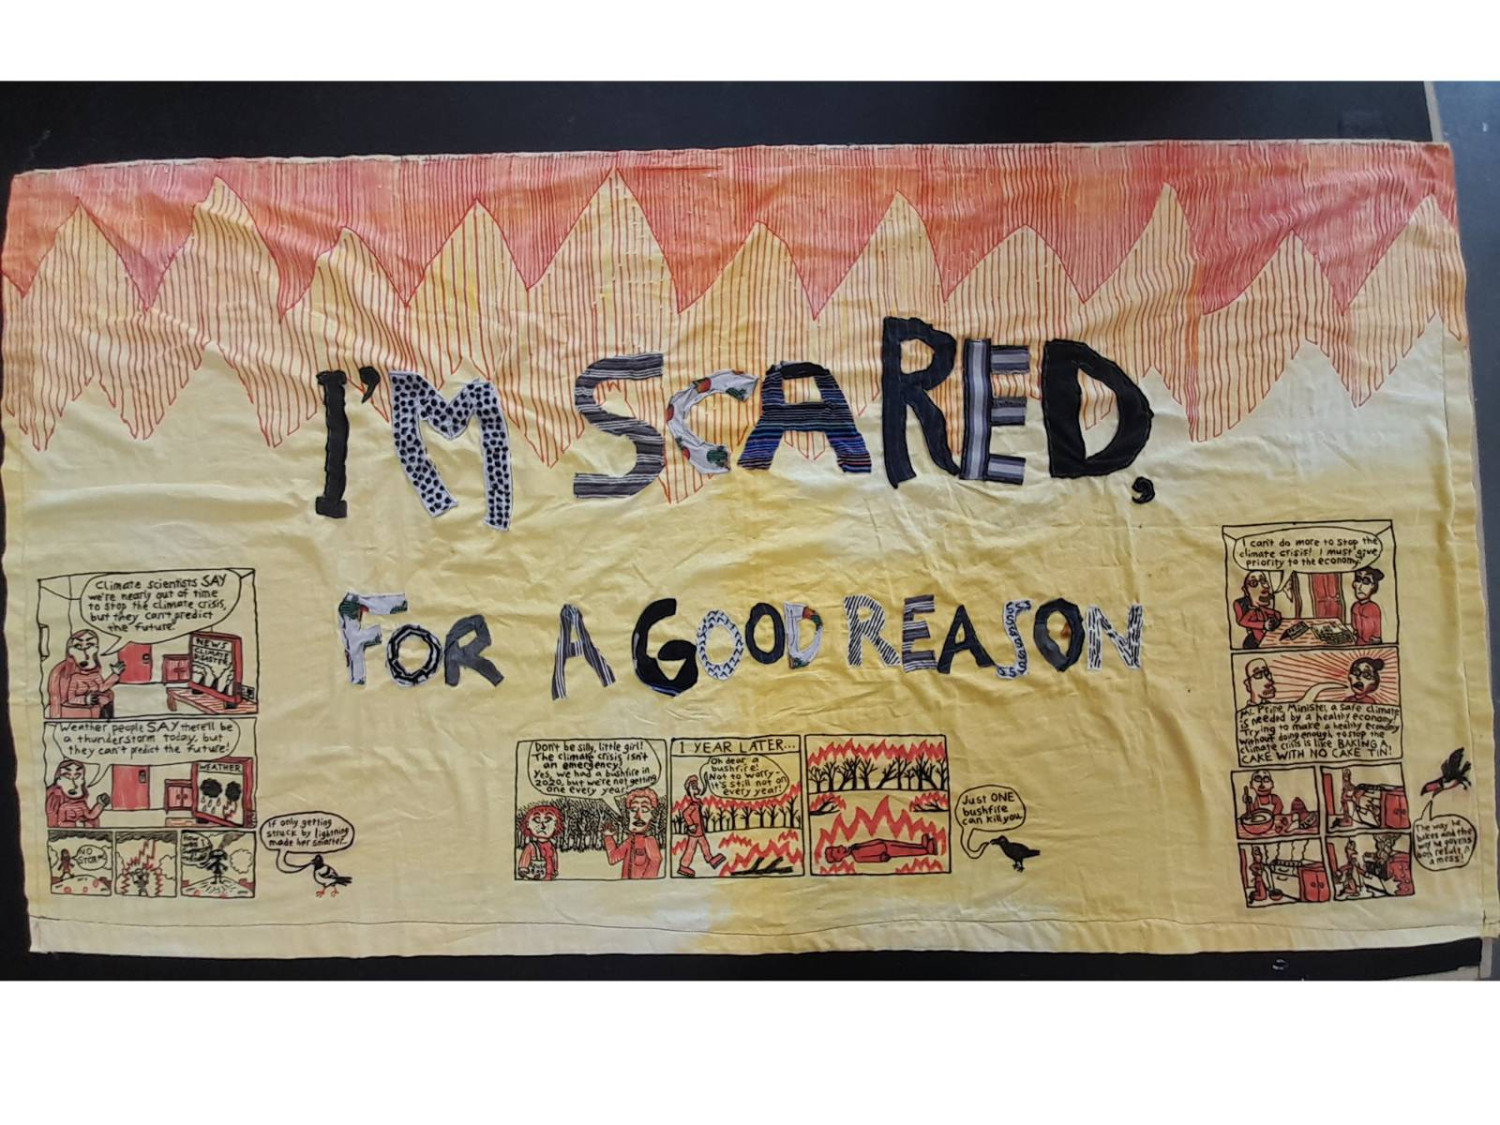 *I'm Scared for a Good Reason*, banner made of old duvet cover and old clothing